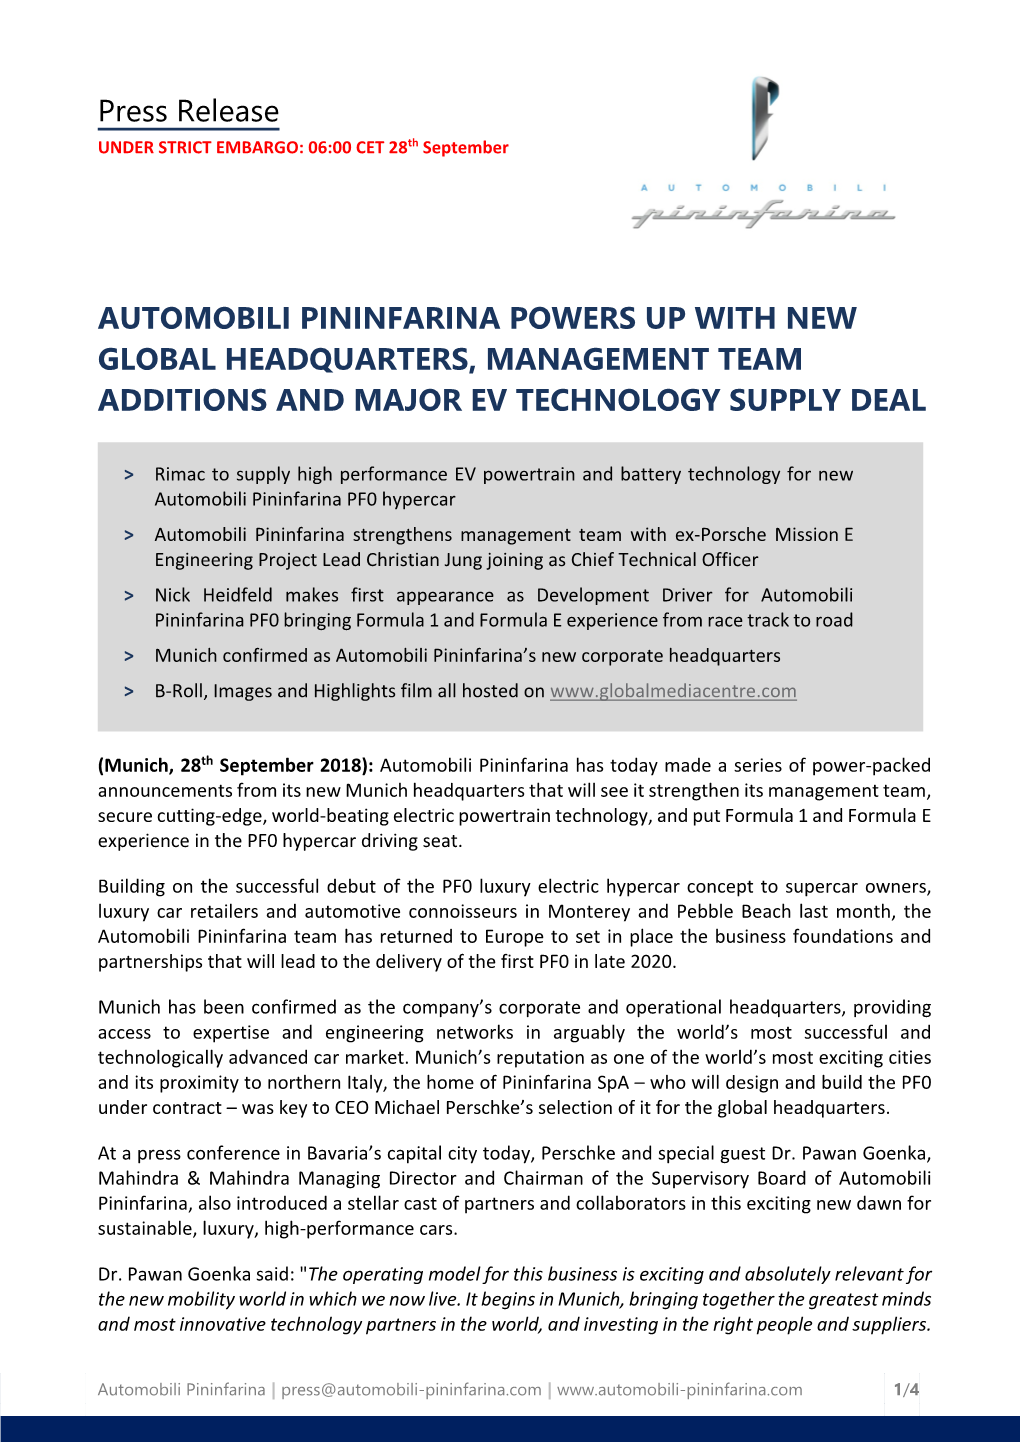 Press Release AUTOMOBILI PININFARINA POWERS up WITH